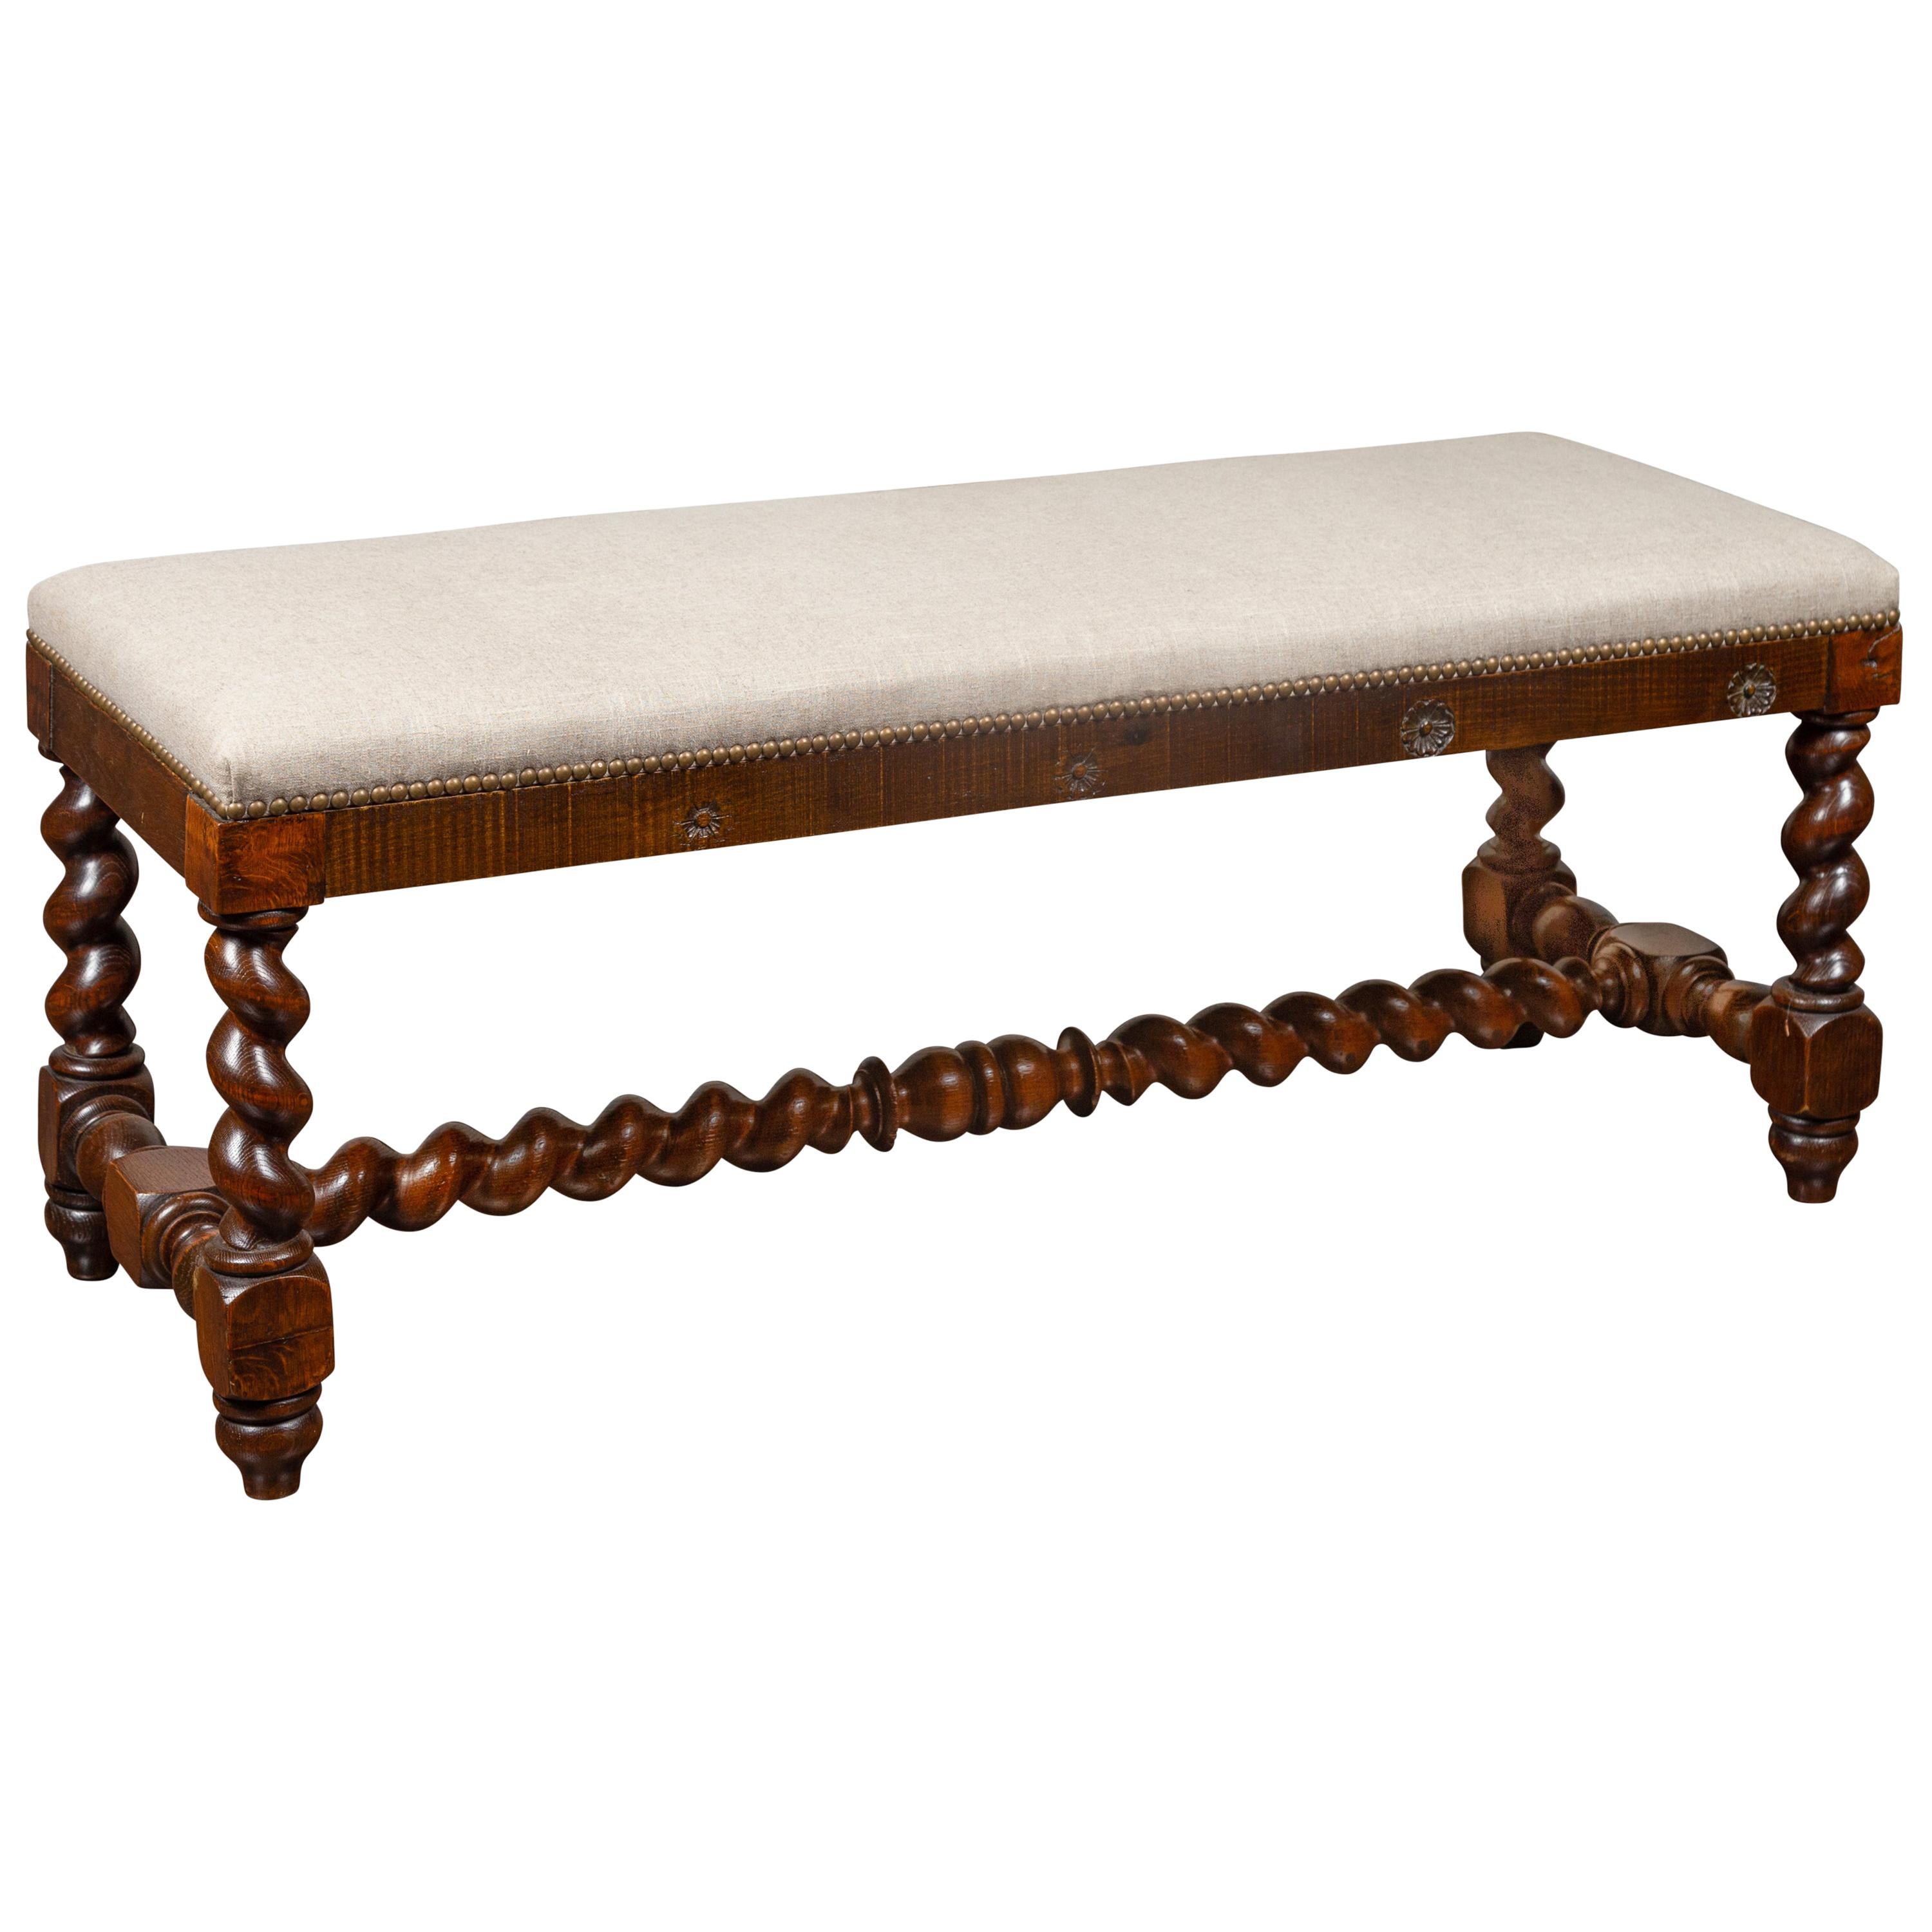 French Louis XIII Style 1880s Walnut Barley Twist Bench with New Upholstery